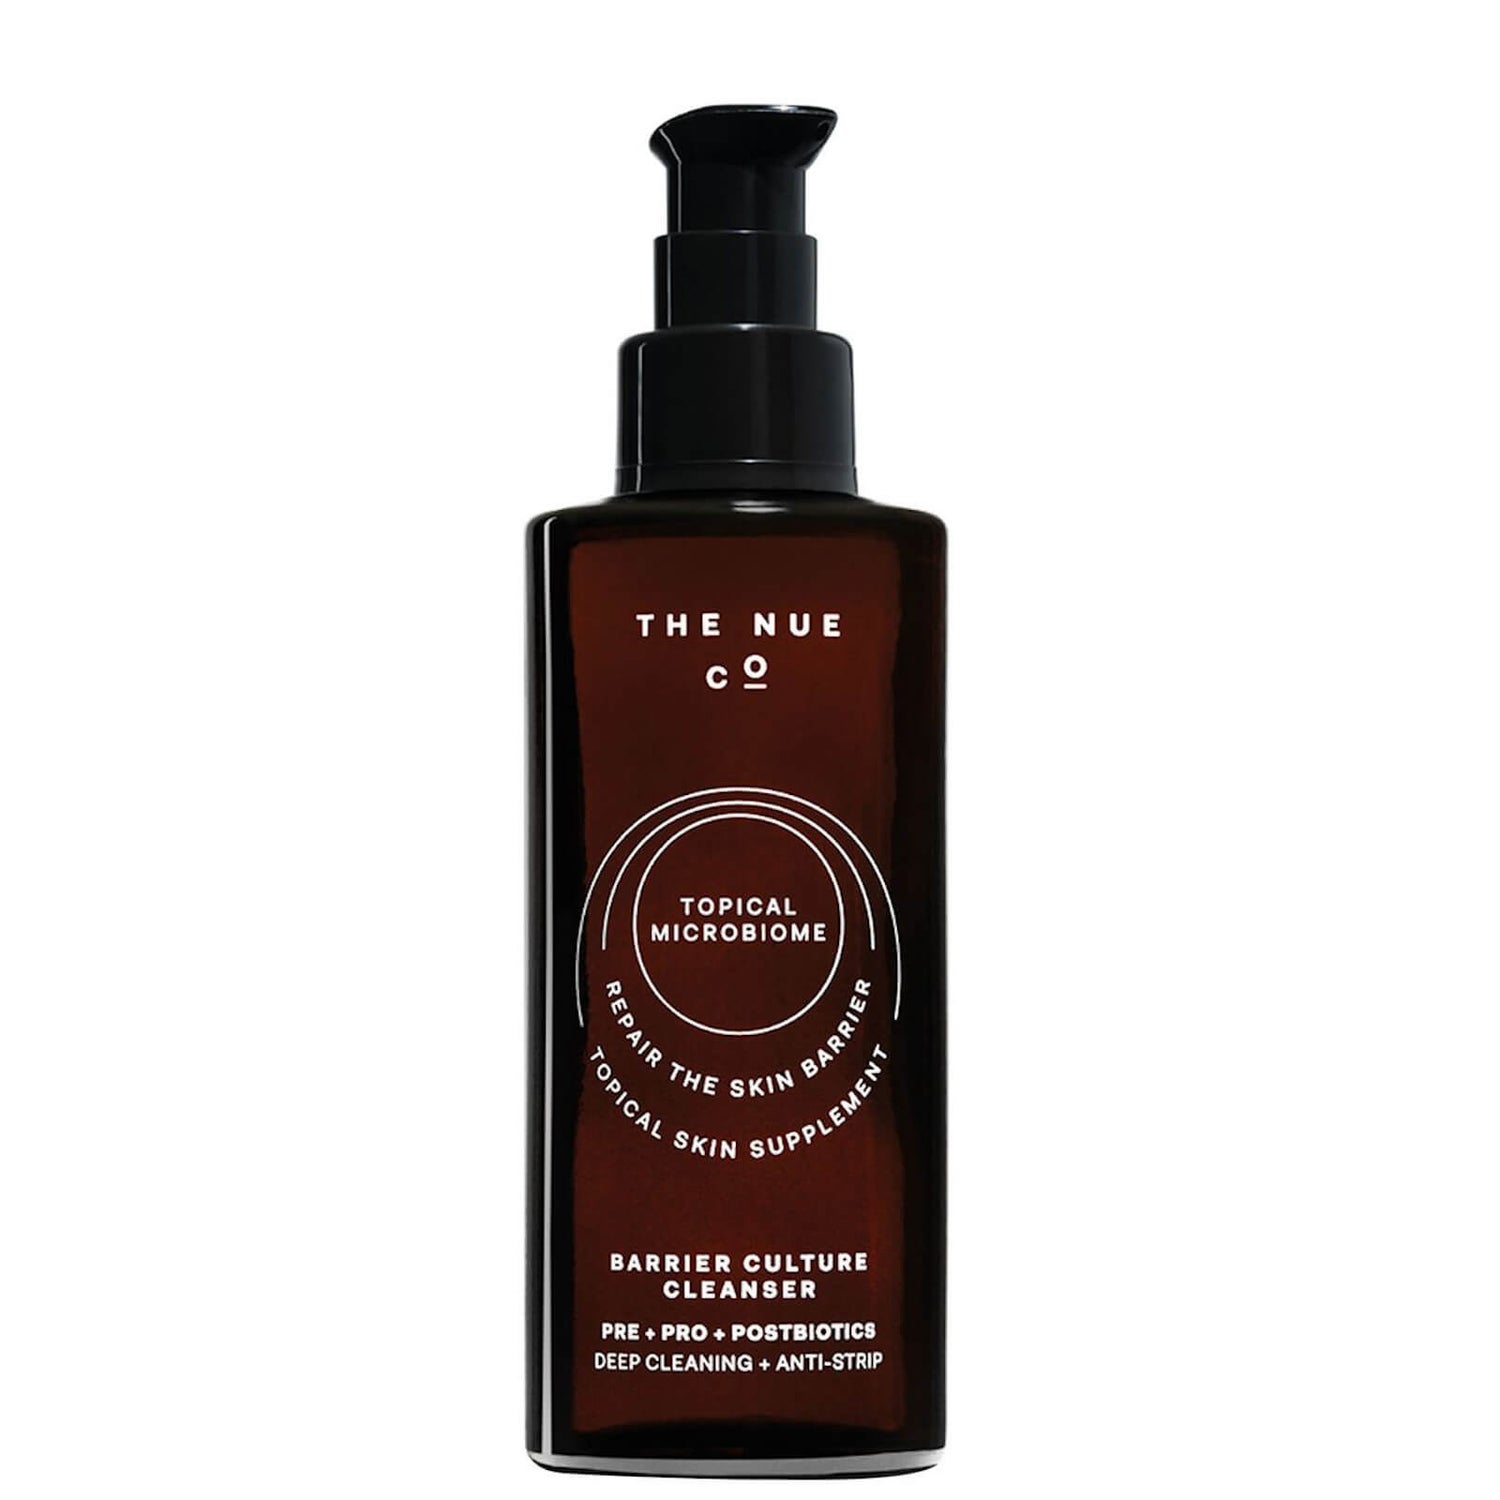 The Nue Co. Barrier Culture Cleanser 120ml